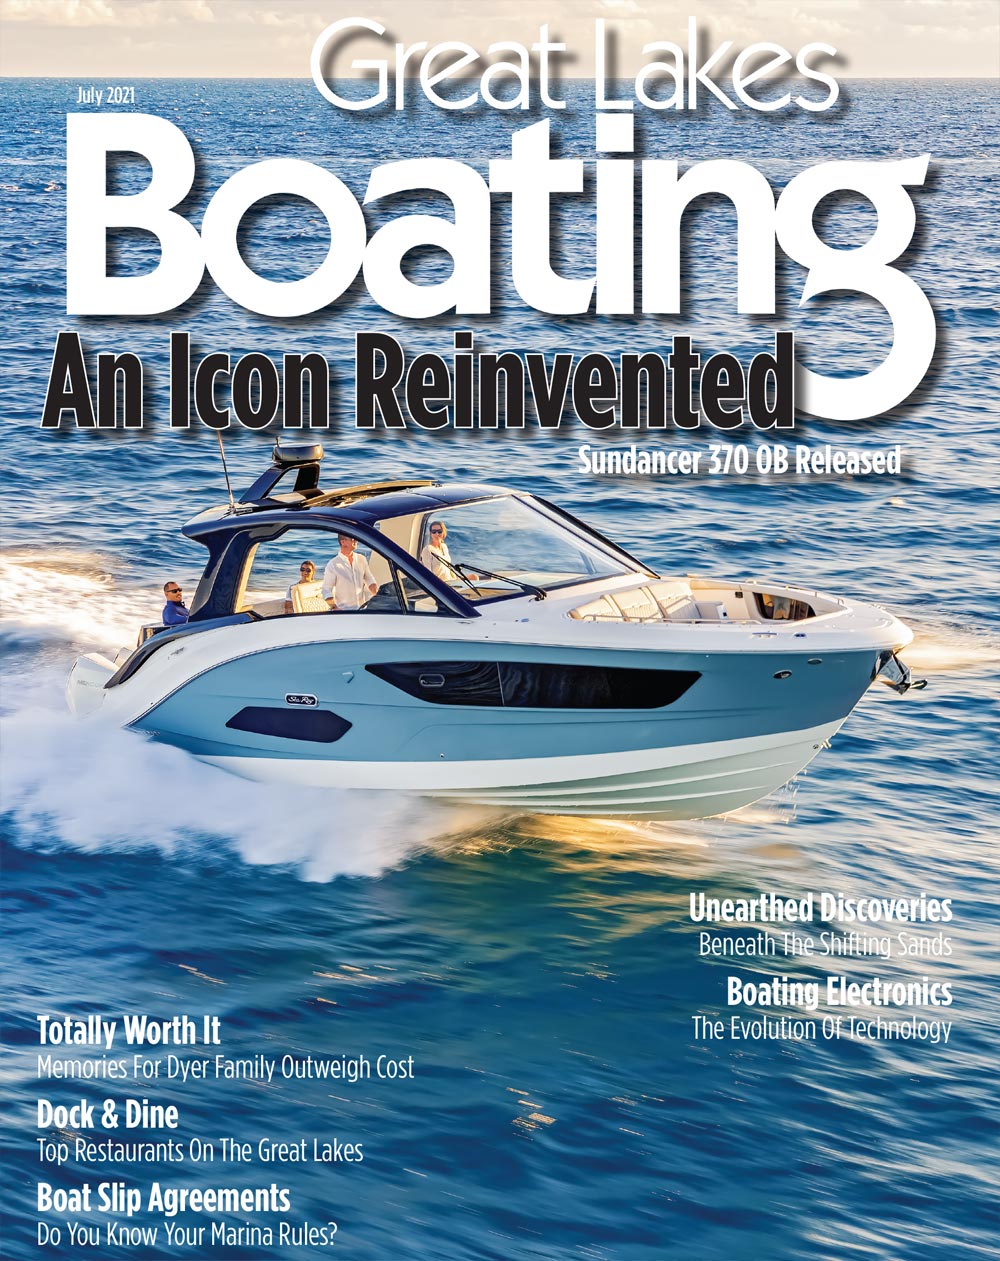 Great Lakes Boating July 2021 Cover